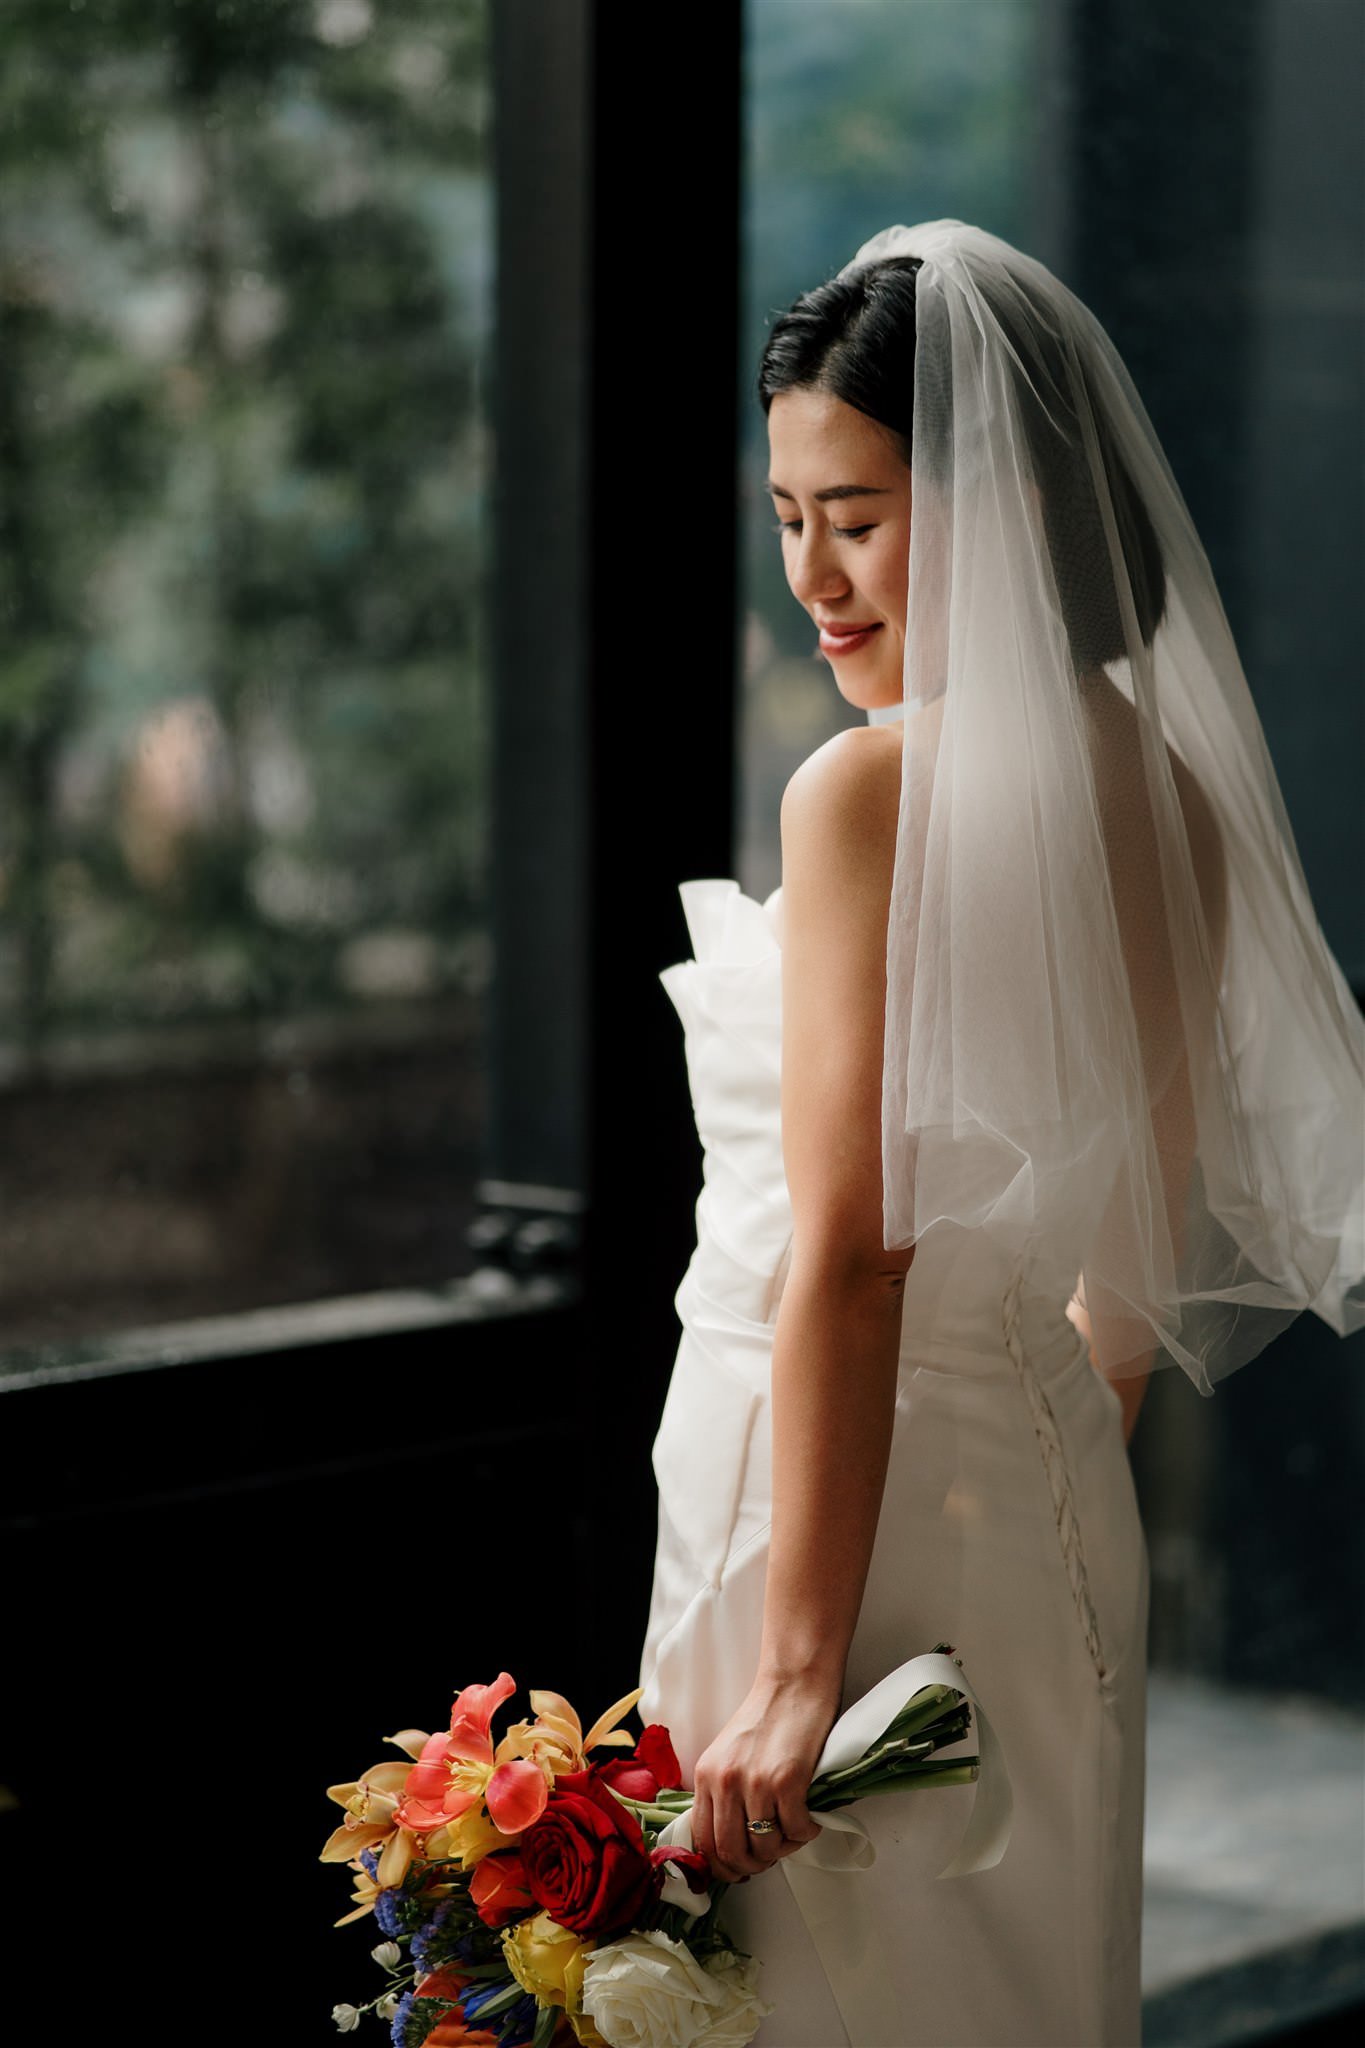 glasshouse-morningside-urban-best-auckland-wedding-venue-central-indoor-photographer-videographer-dear-white-productions-top-industrial-chinese-ceremony-tradition (90).jpg